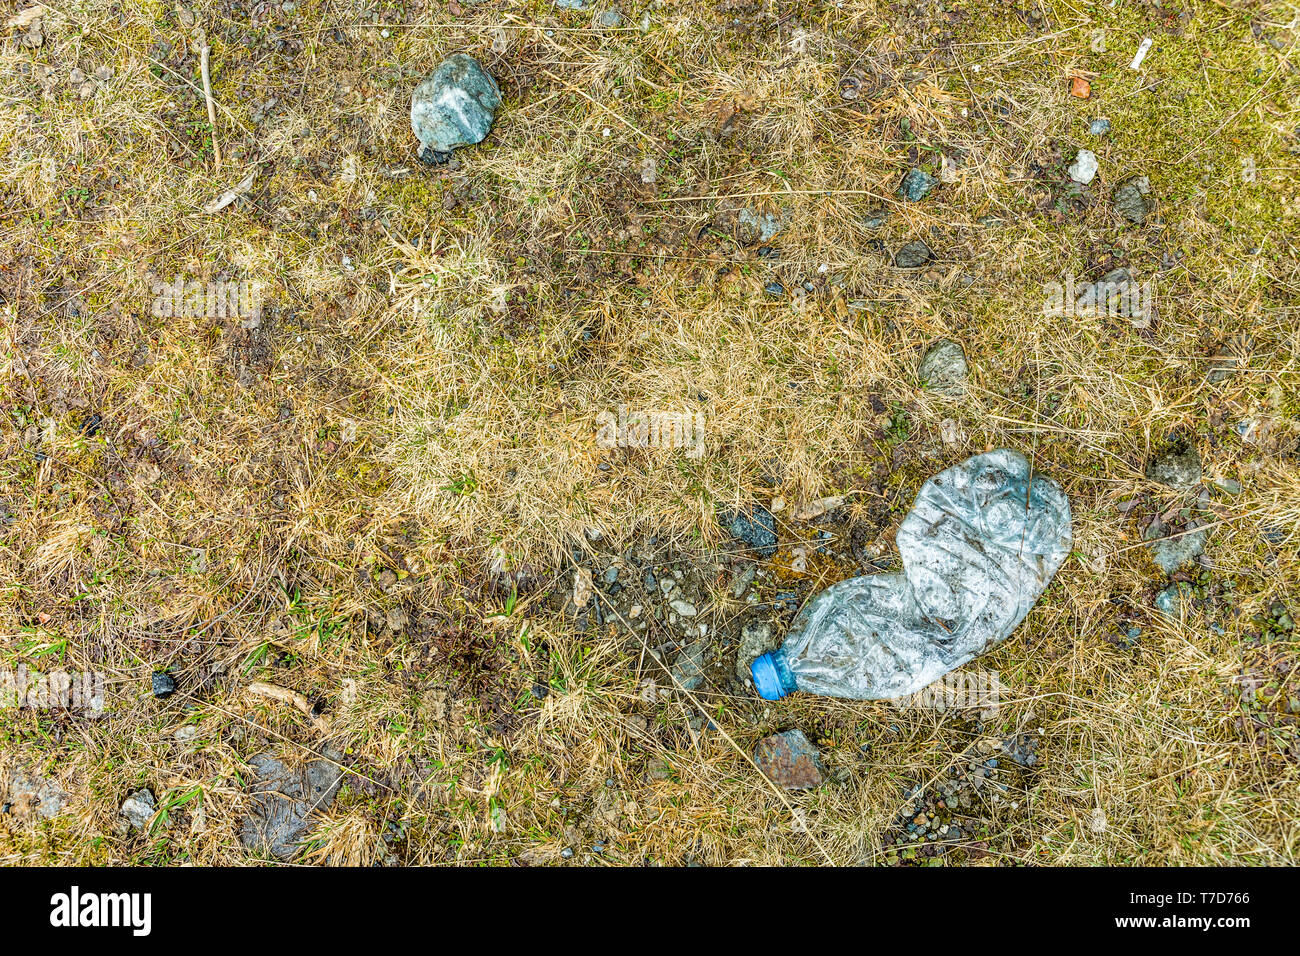 Plastic water bottle left on forest floor in a remote location Stock Photo